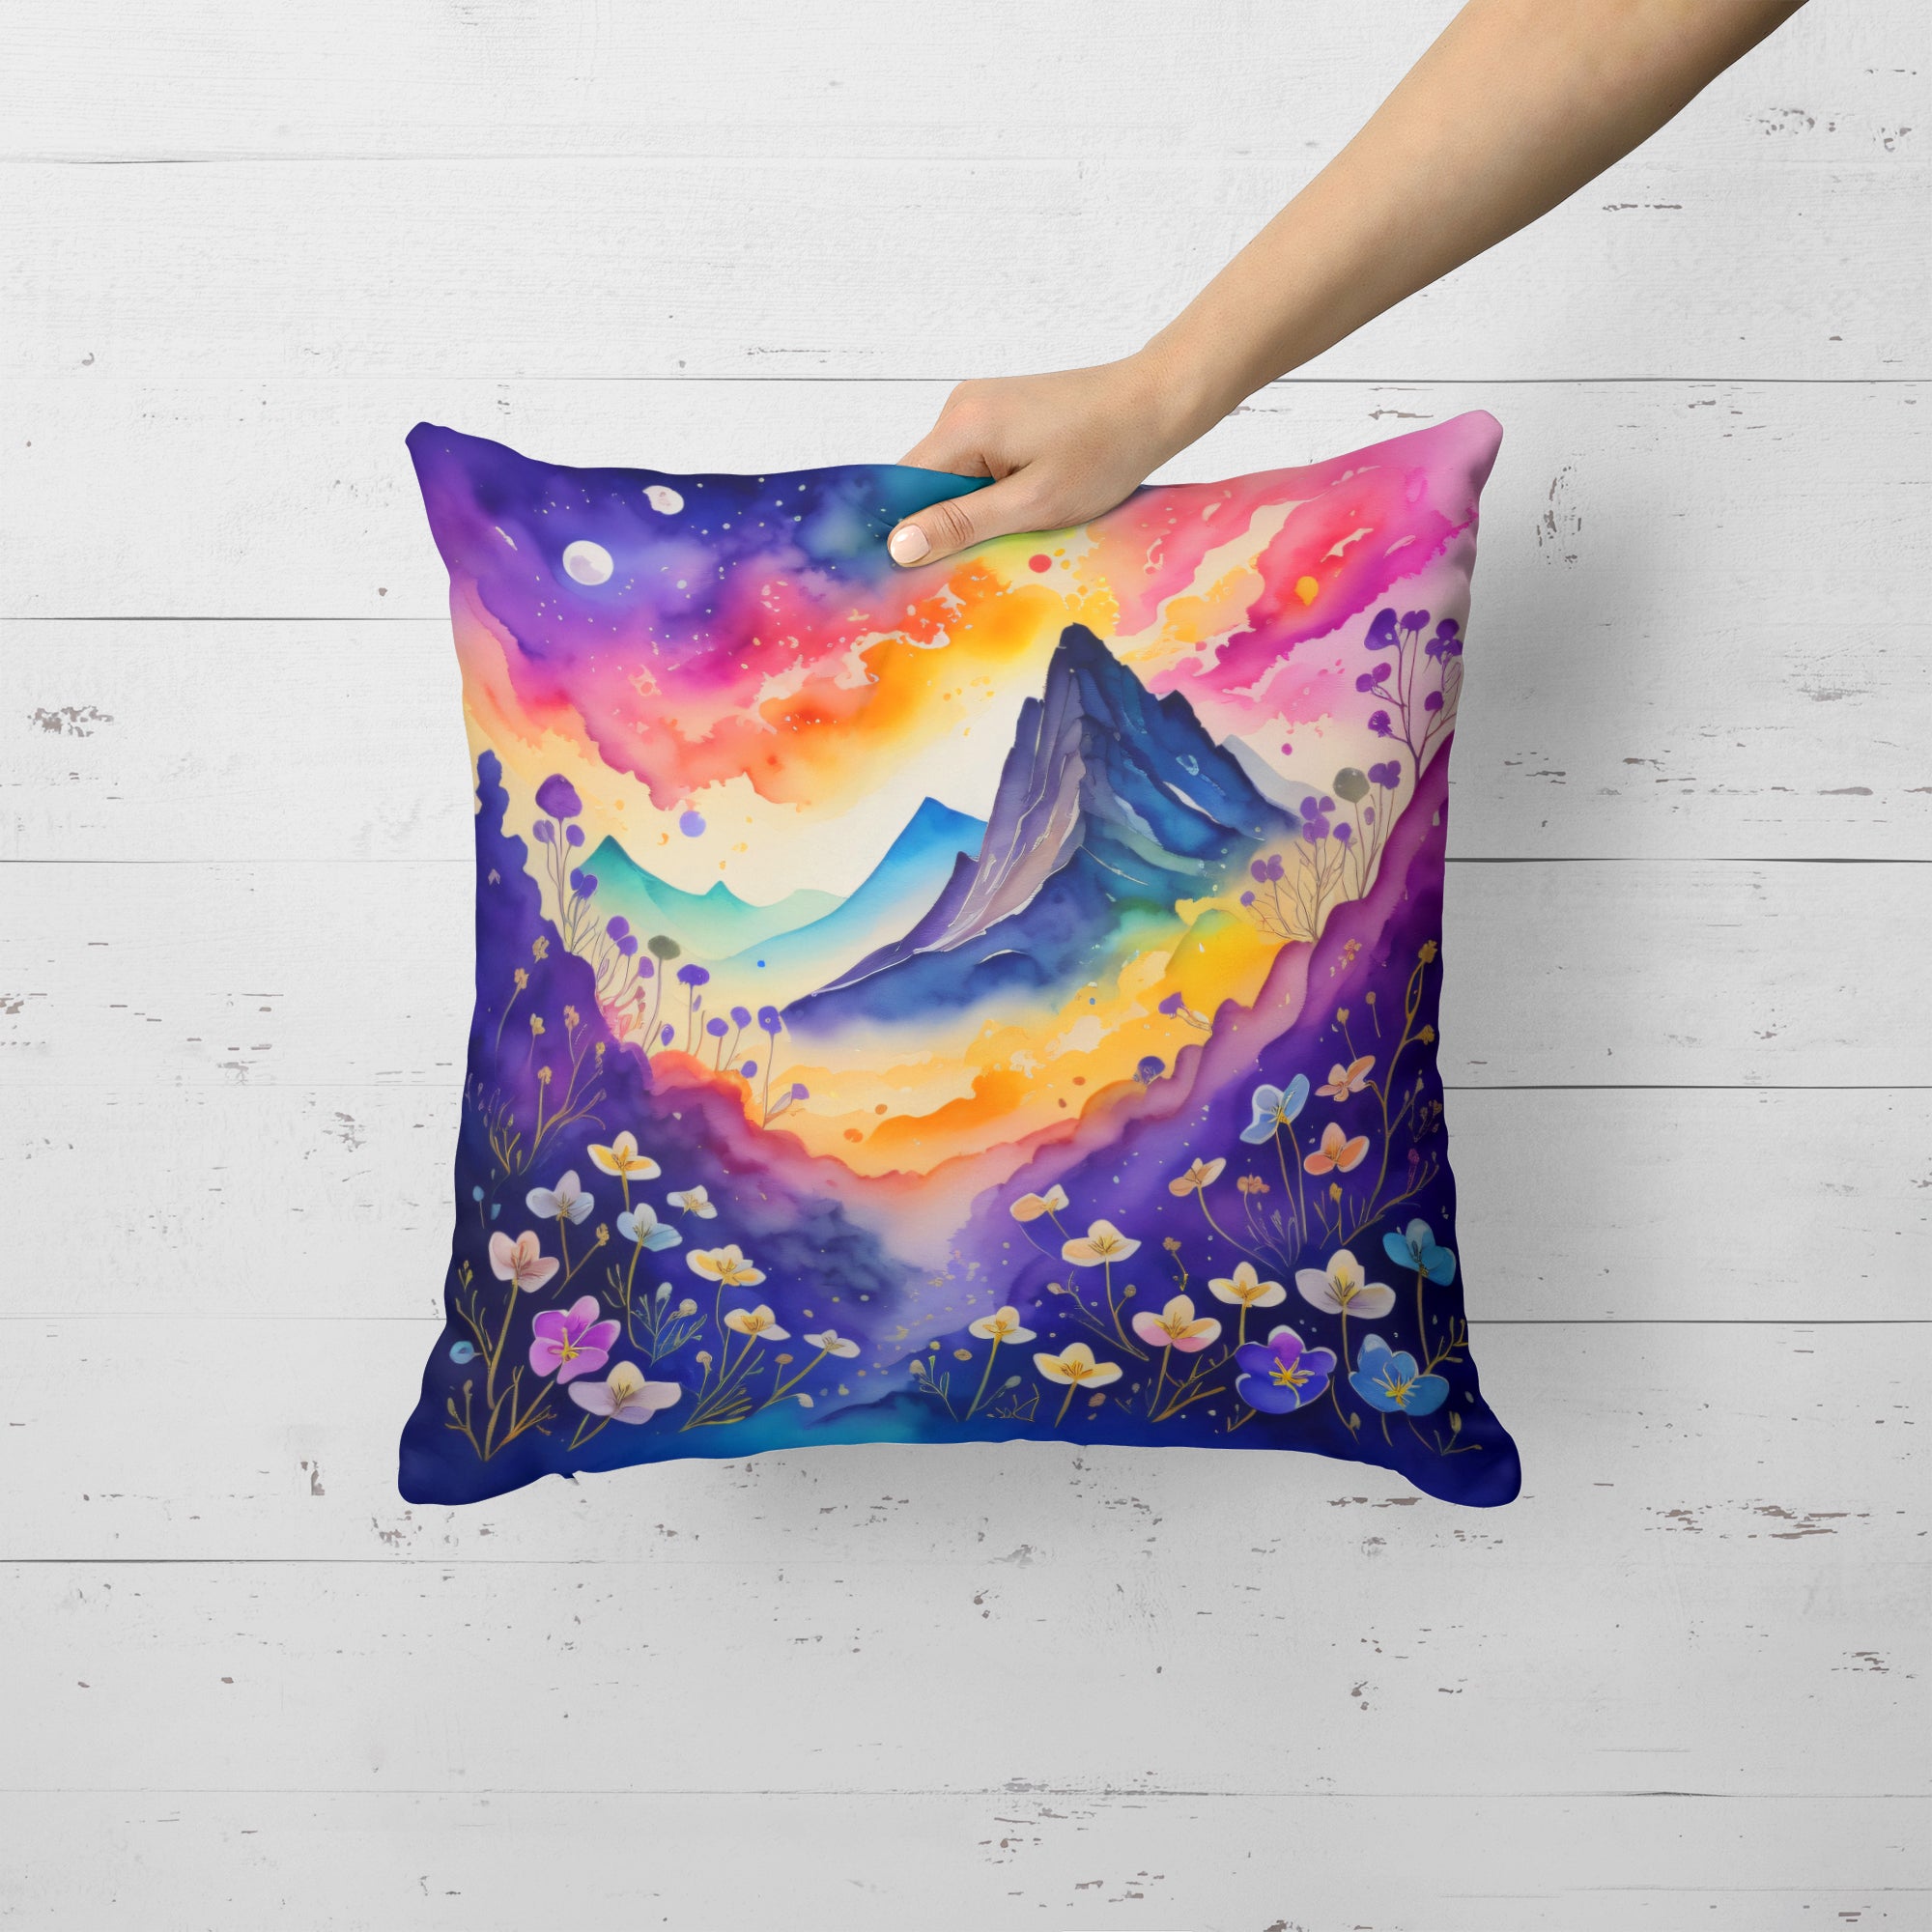 Buy this Colorful Violets Fabric Decorative Pillow